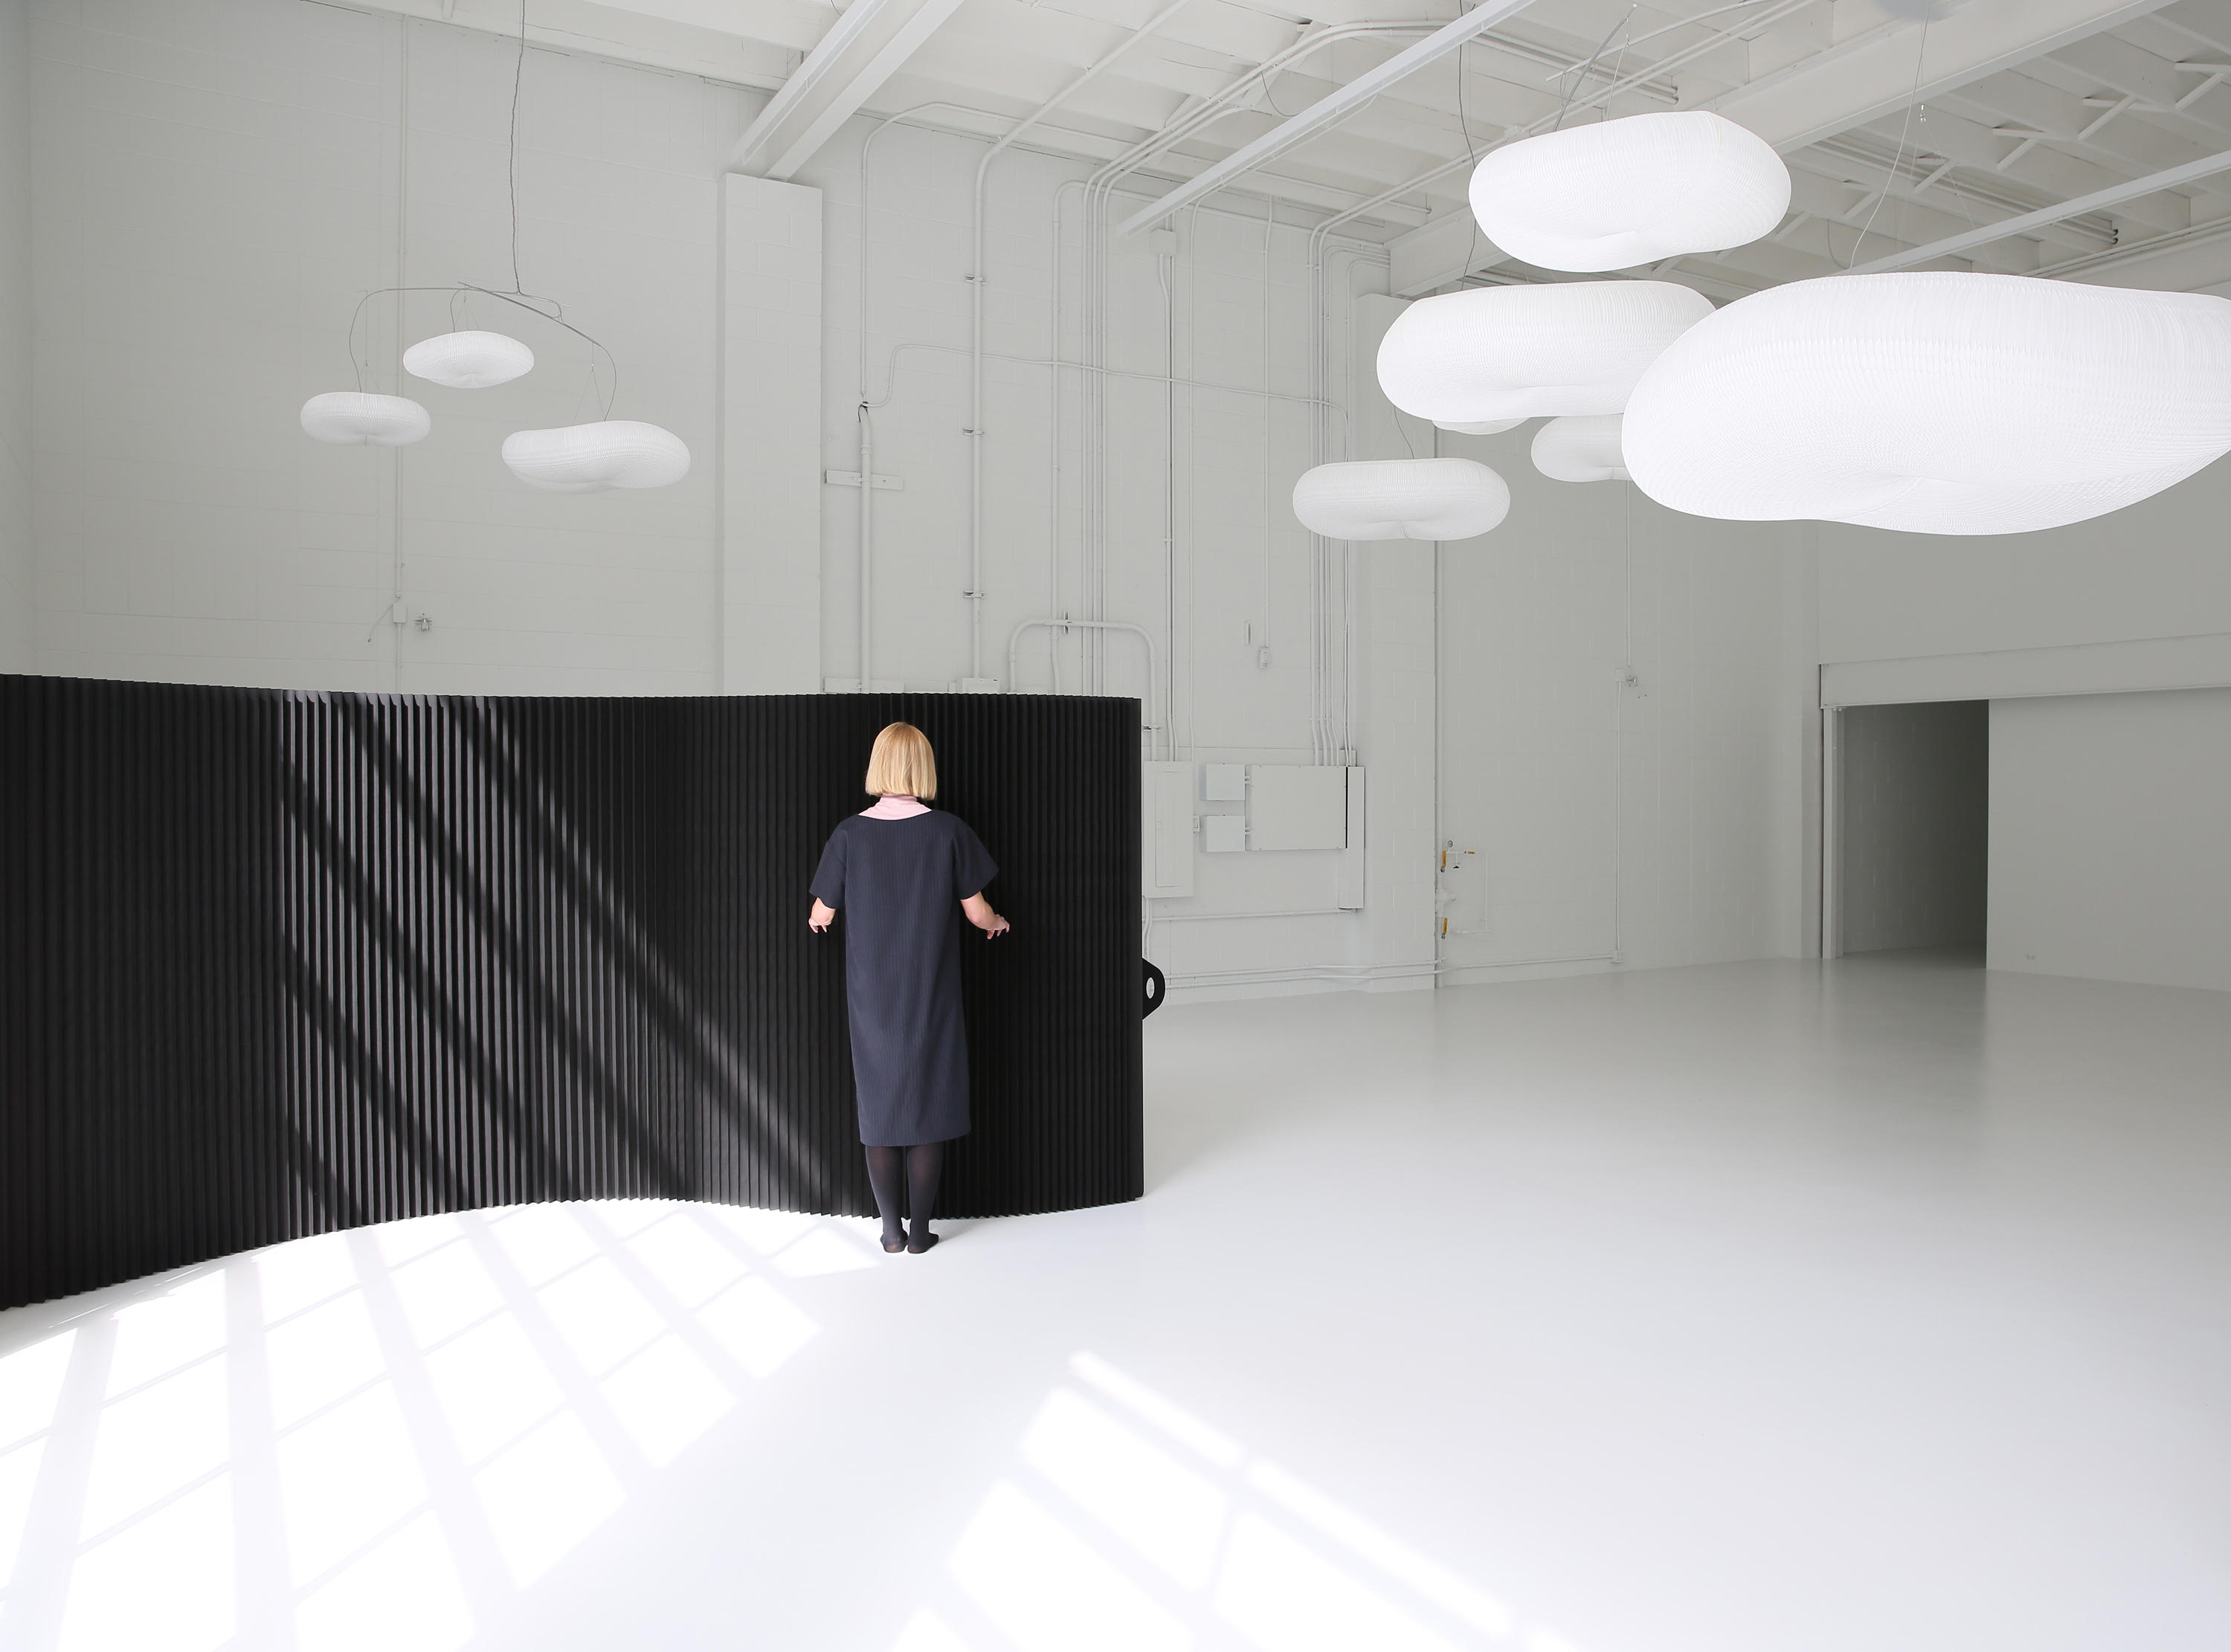 paper softwall | flexible freestanding partition